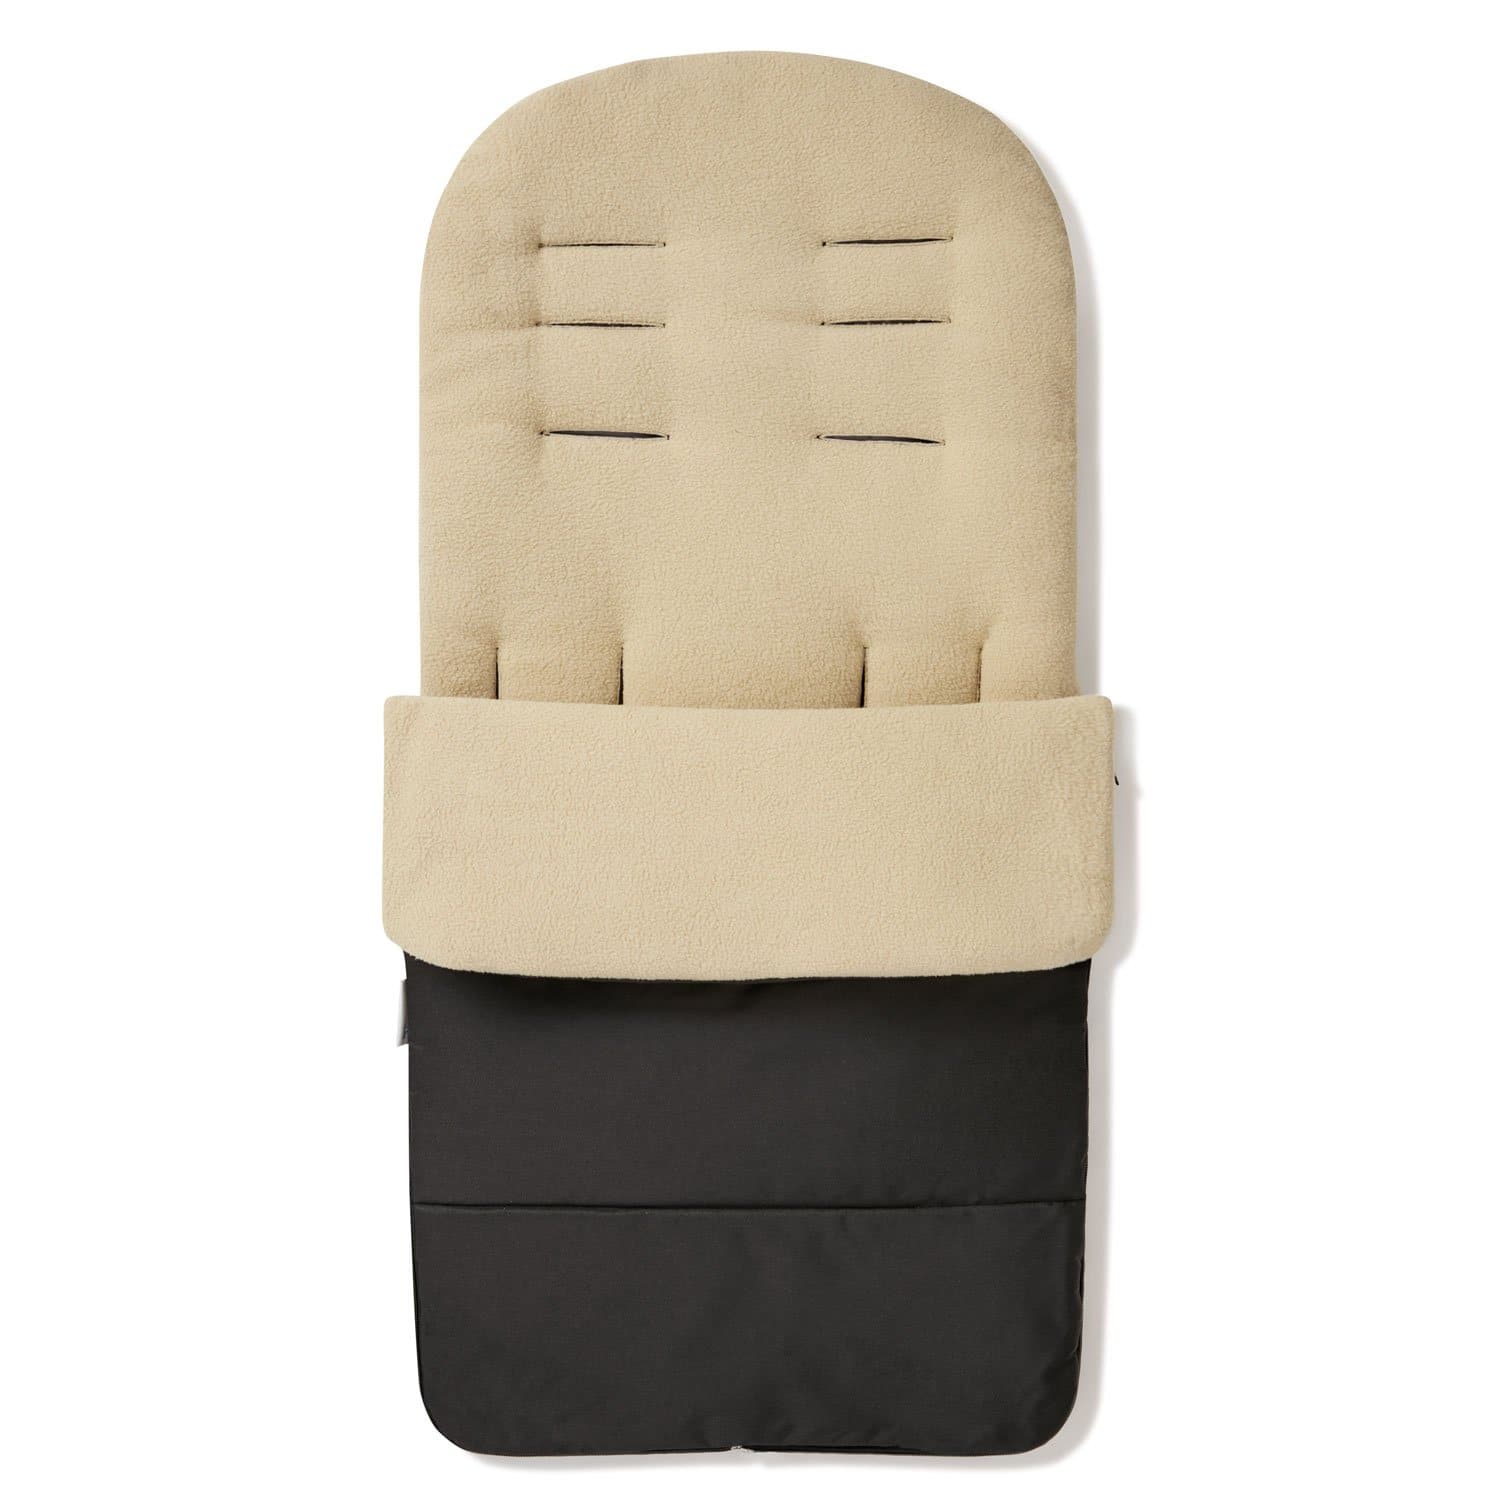 Premium Footmuff / Cosy Toes Compatible with Easywalker - Desert Sand / Fits All Models | For Your Little One